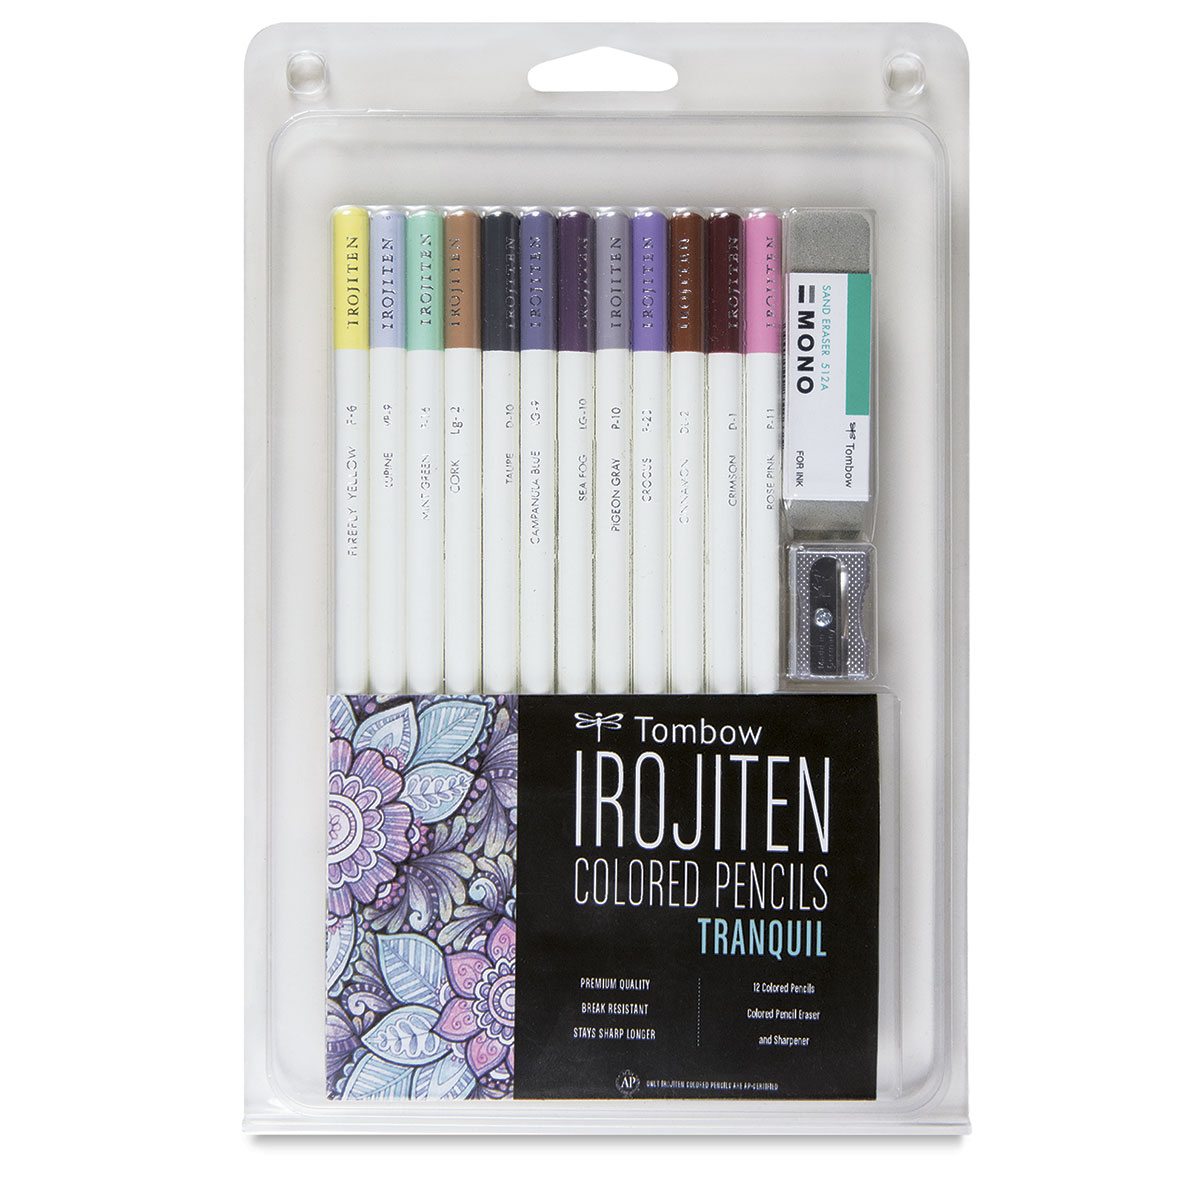 Tombow Irojiten Colored Pencil Set, Tranquil. Includes 12 Premium Colored Pencils, Sharpener, and Eraser - image 1 of 5